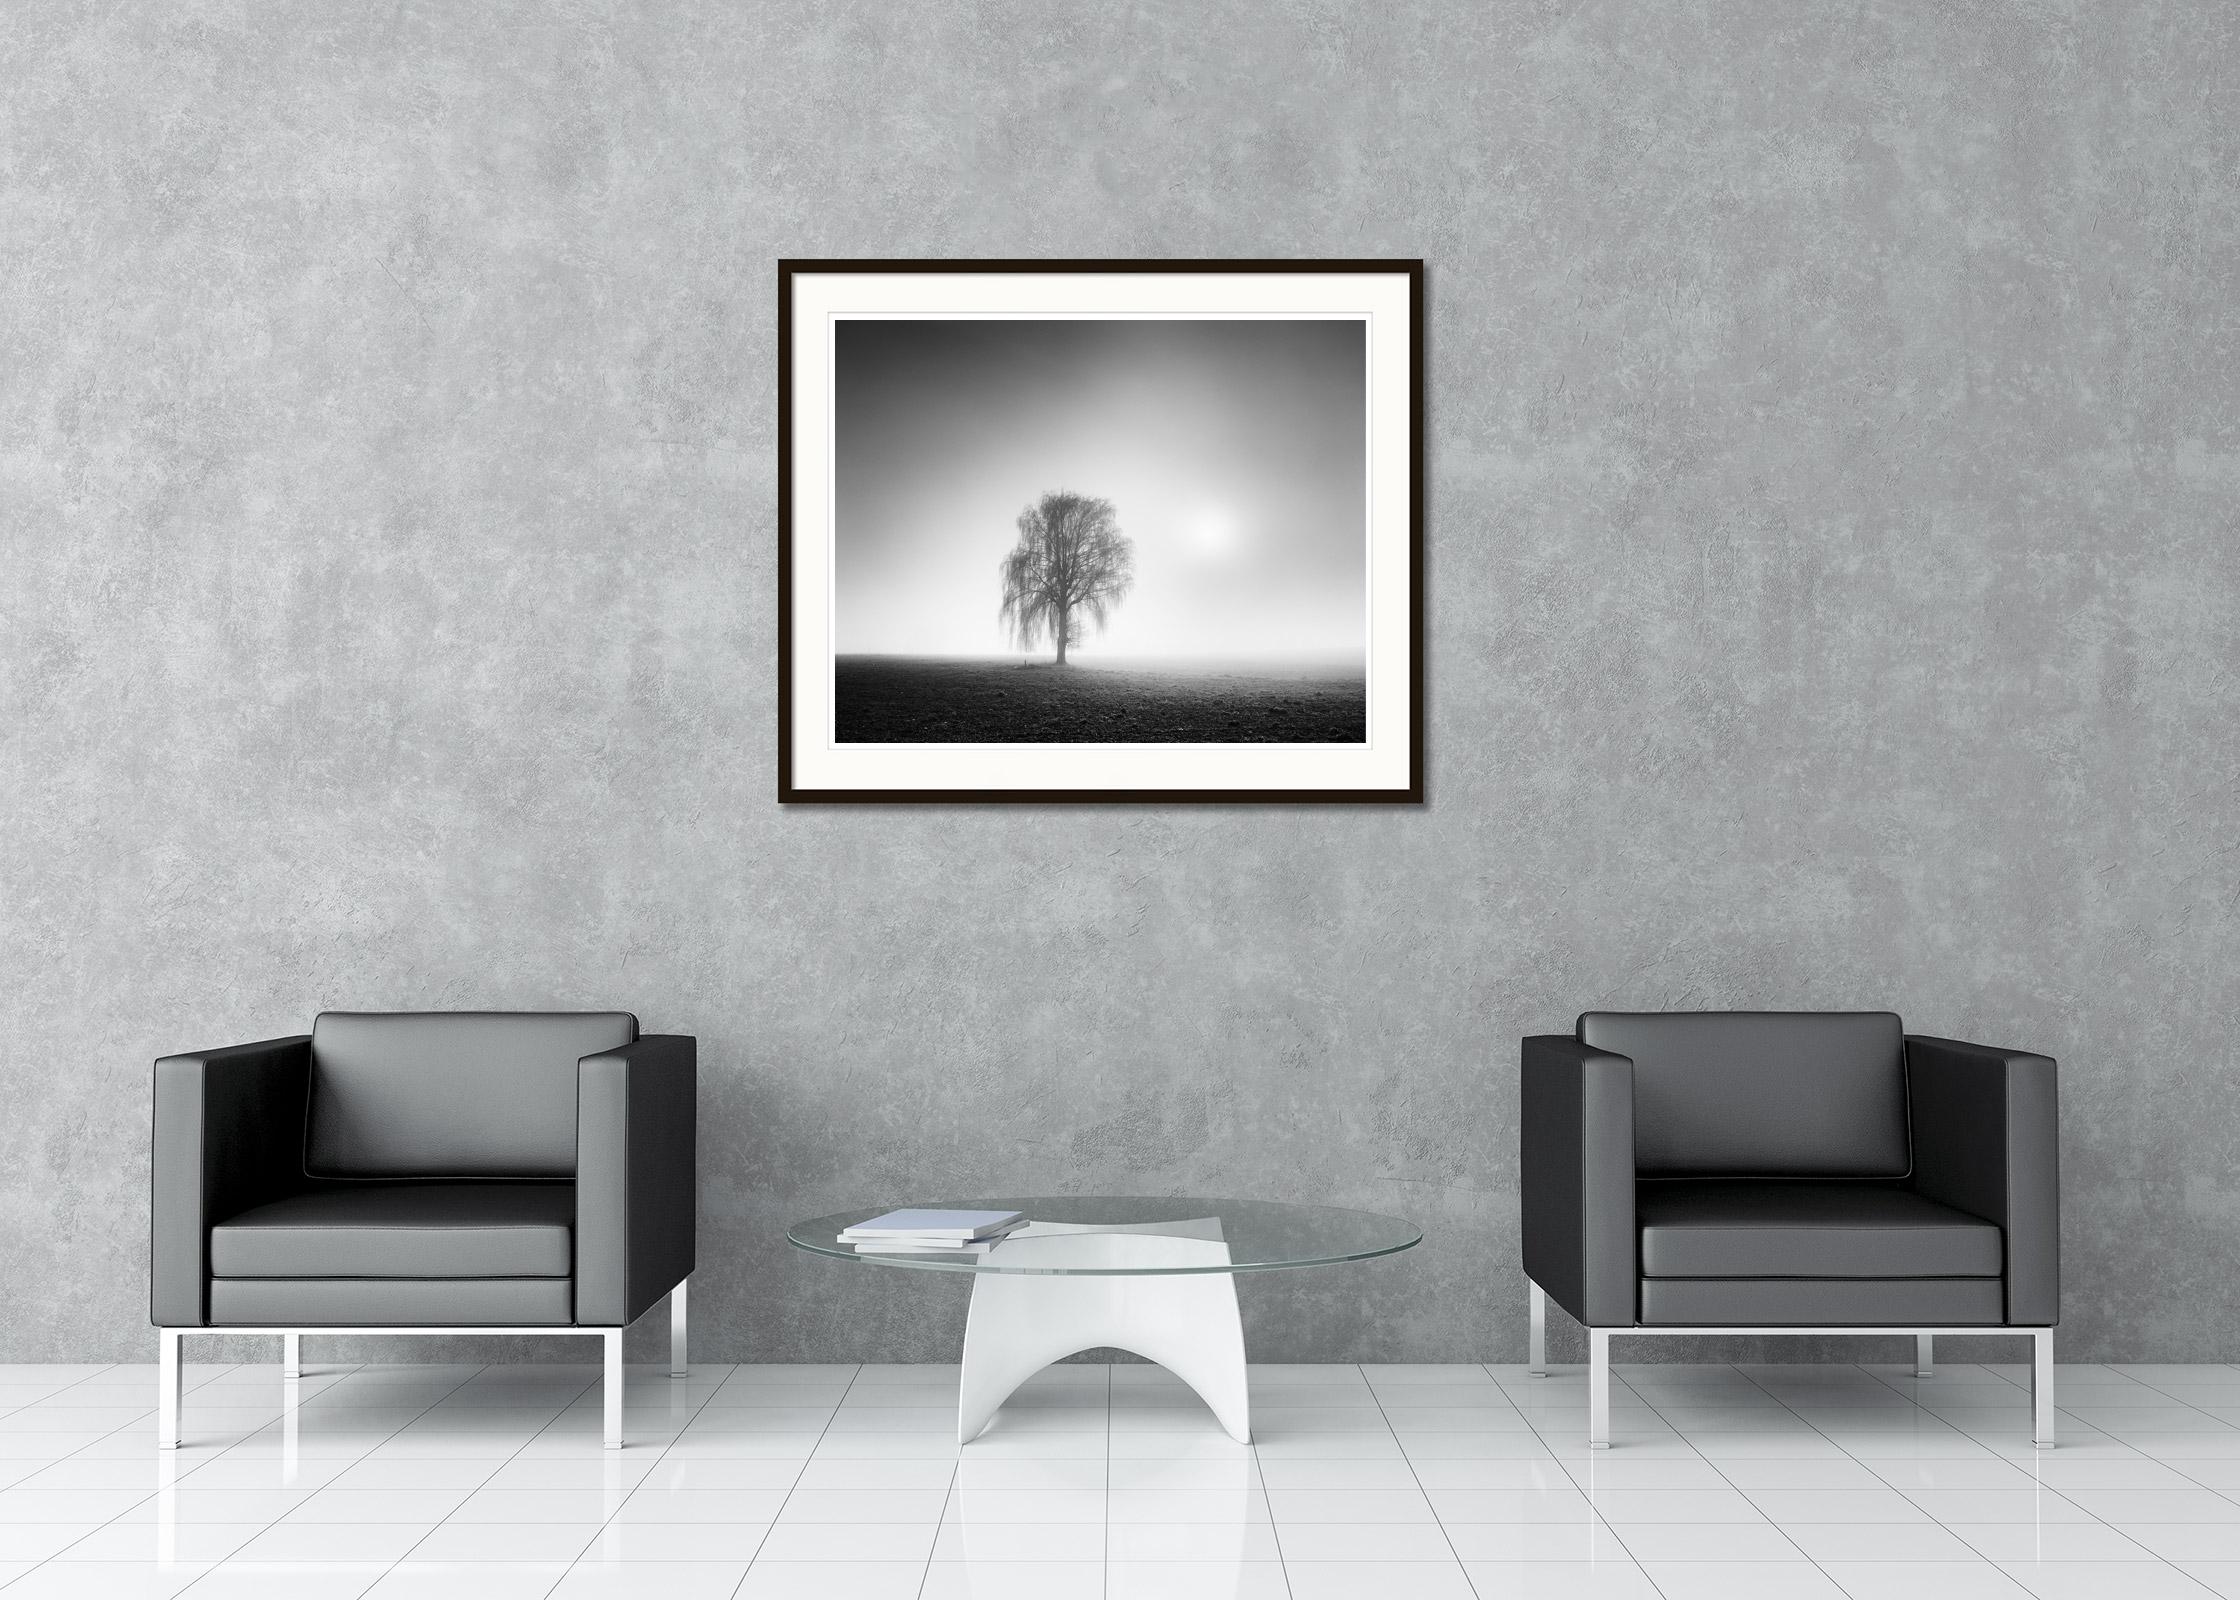 Foggy Morning, single Tree, Austria,  black and white landscape art photography - Gray Black and White Photograph by Gerald Berghammer, Ina Forstinger